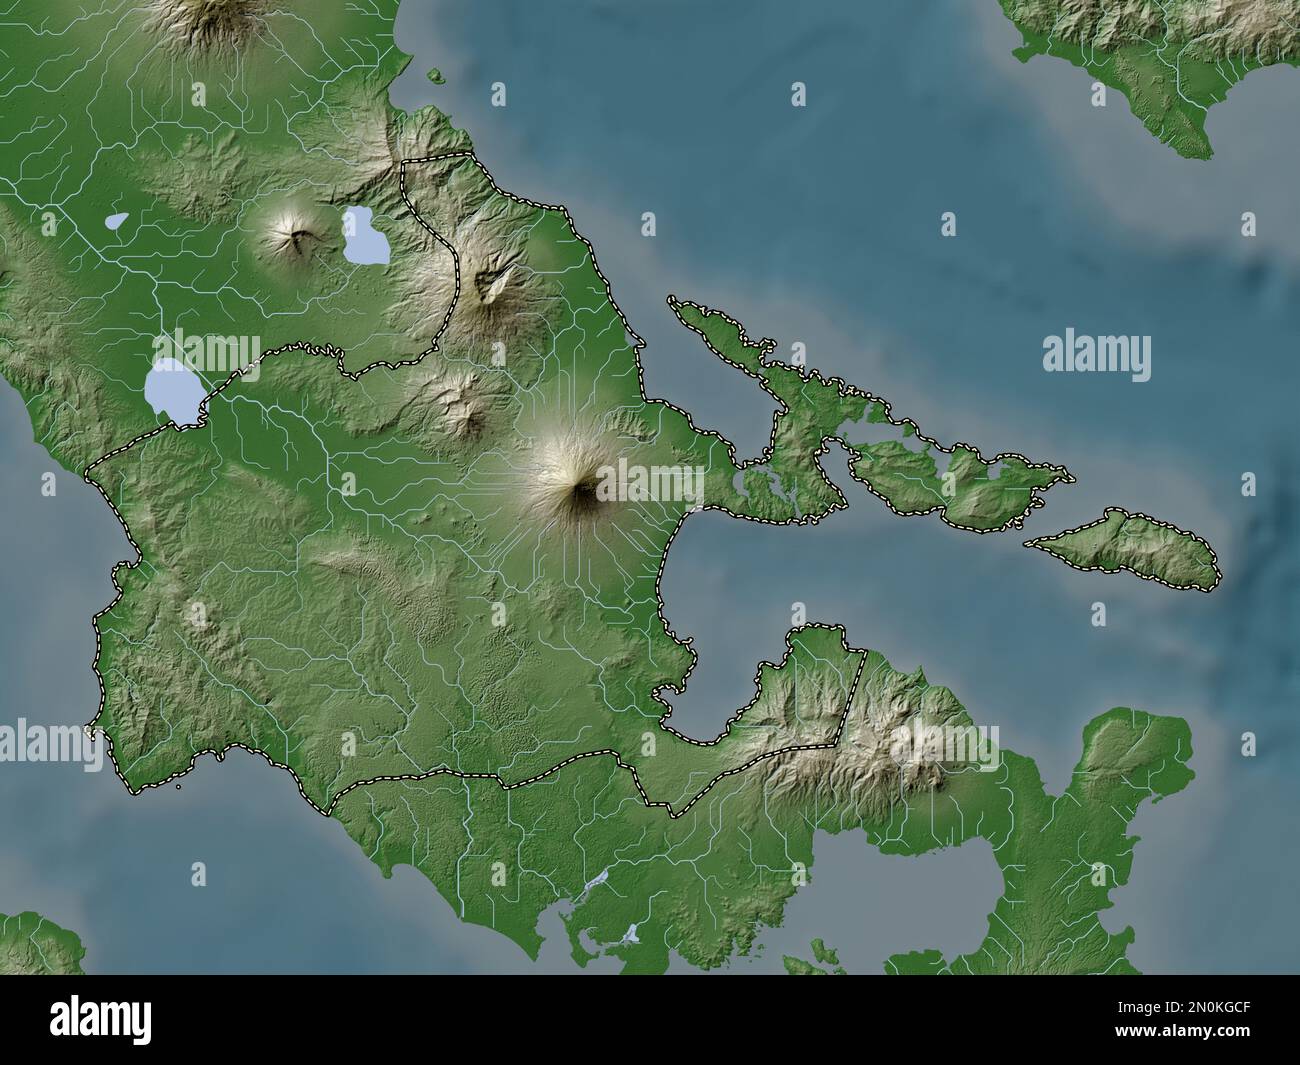 Albay, province of Philippines. Elevation map colored in wiki style with lakes and rivers Stock Photo